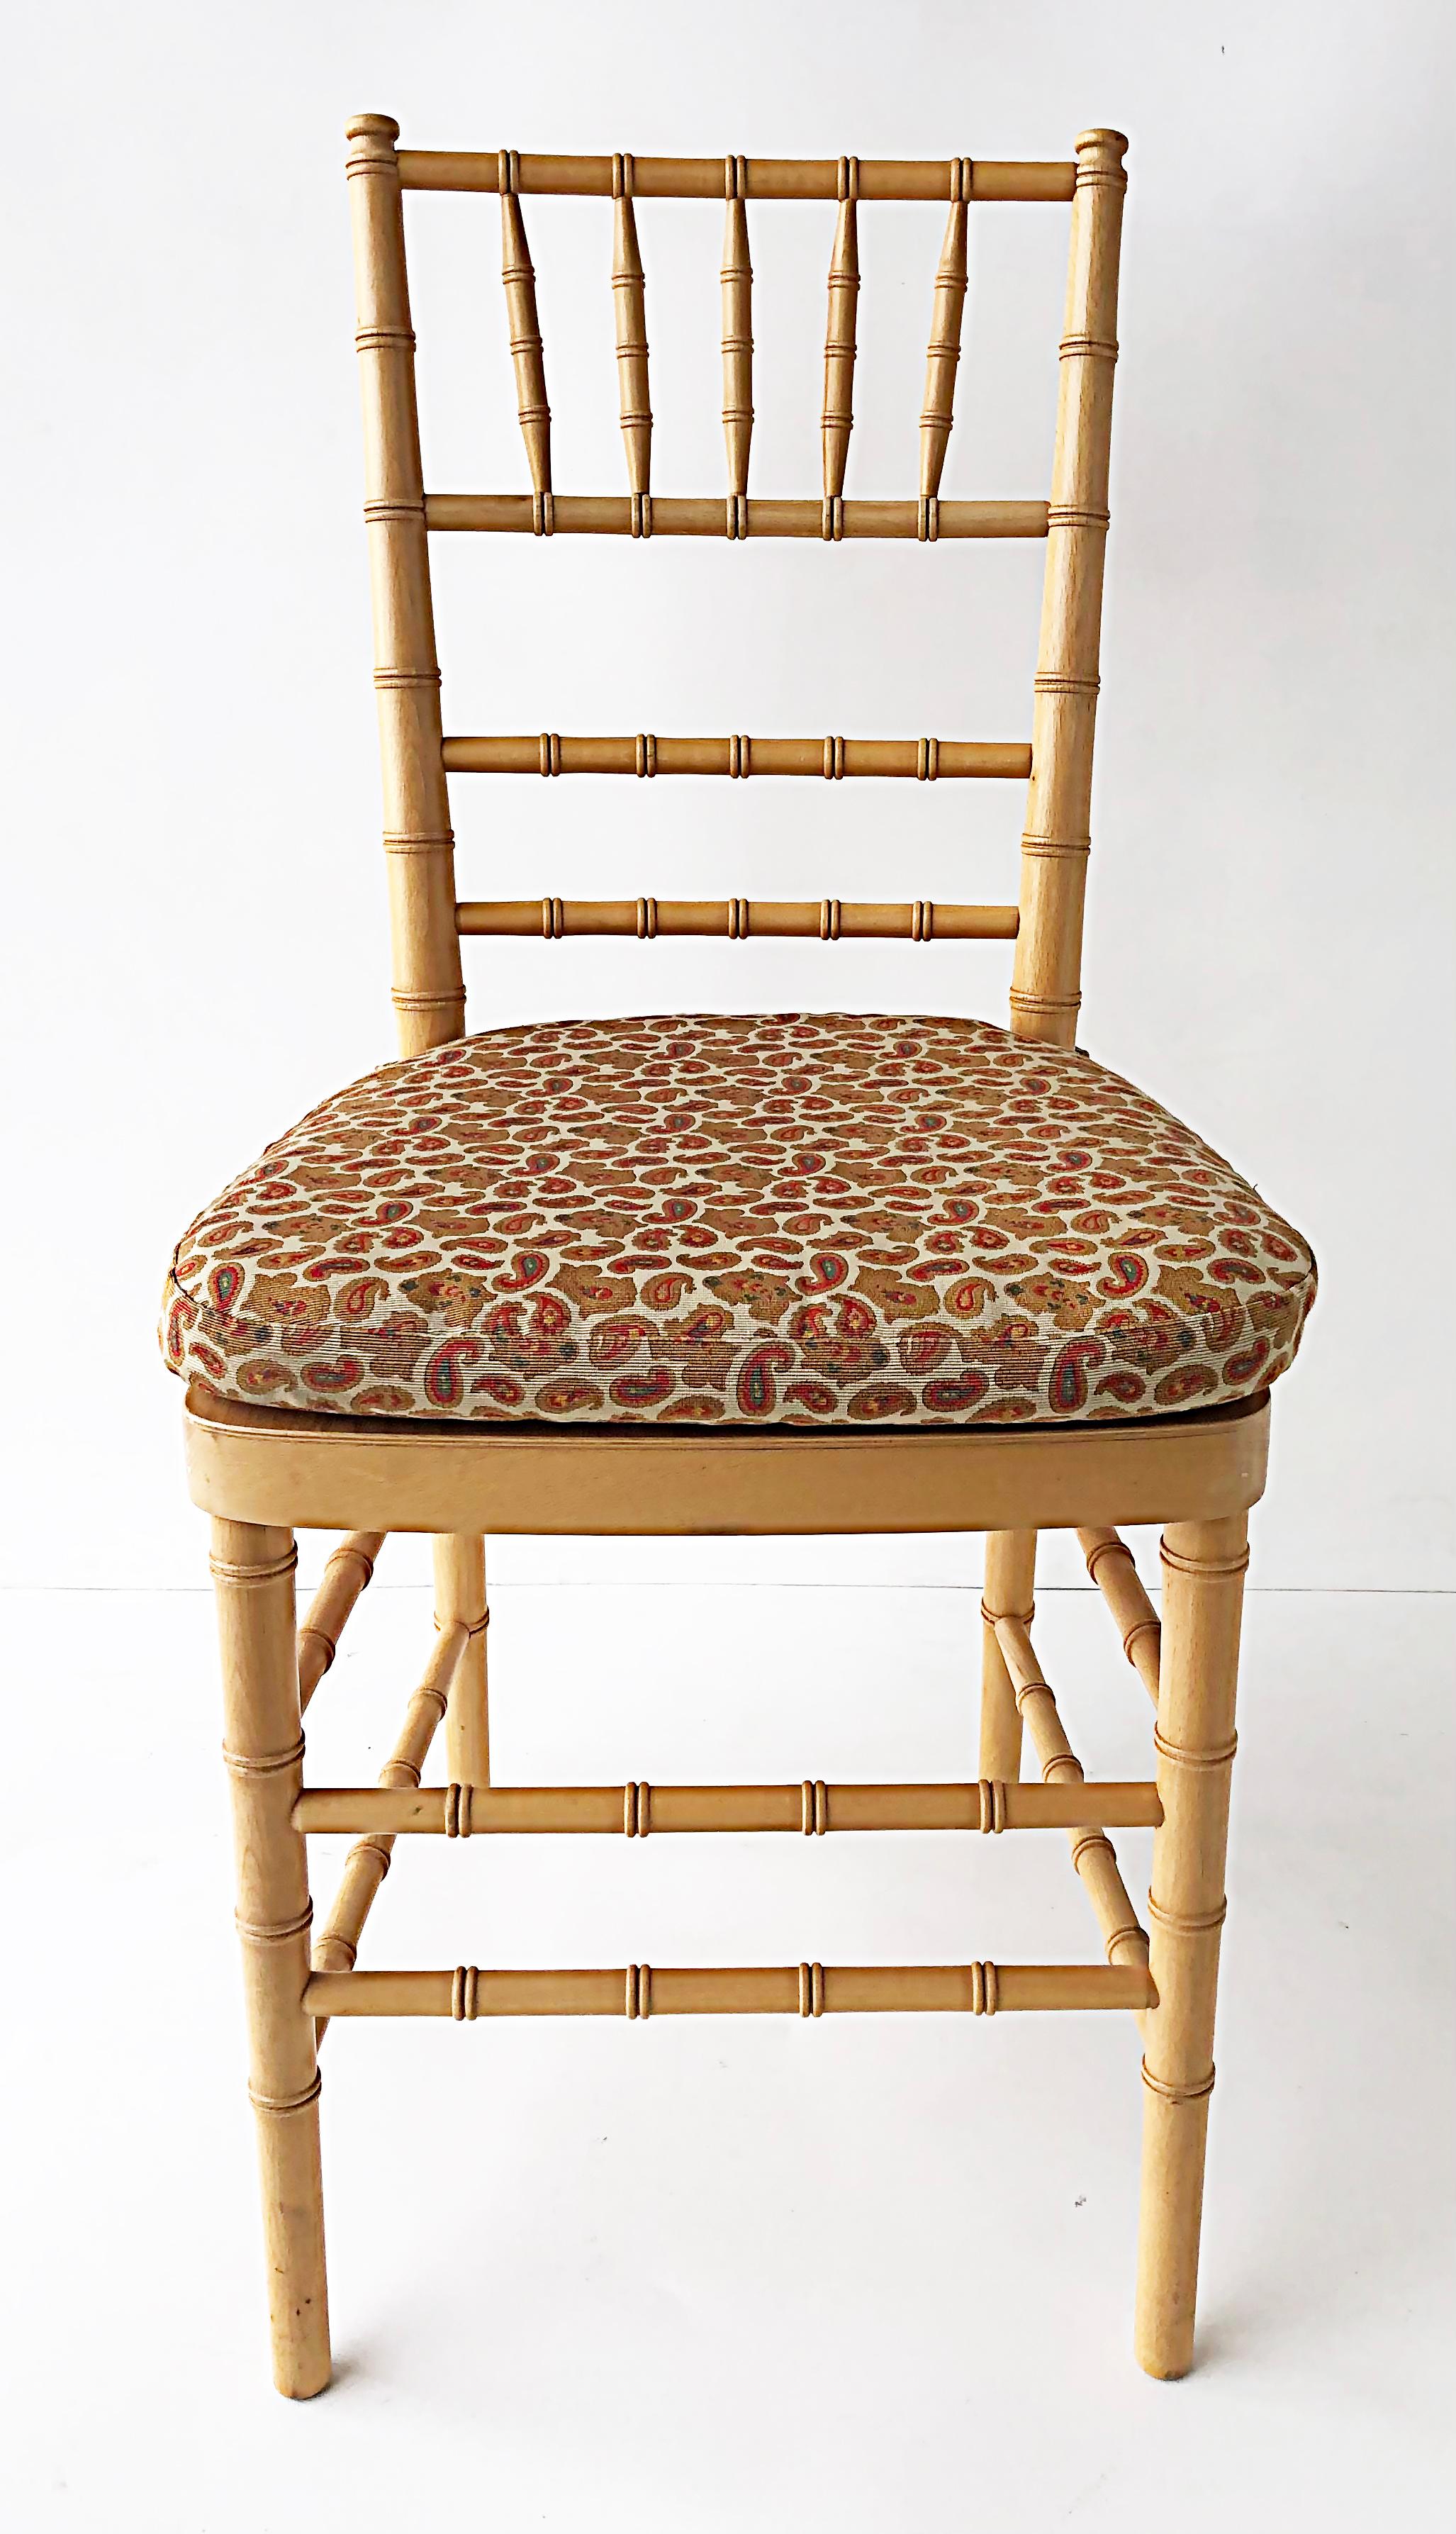 Faux bamboo chair with loose Paisley seat cushion

Offered for sale is a faux-bamboo carved wood chair that has a loose upholstered cushion in a mini paisley pattern. This chair is reminiscent of Victorian ballroom chairs. The chair has a delicate